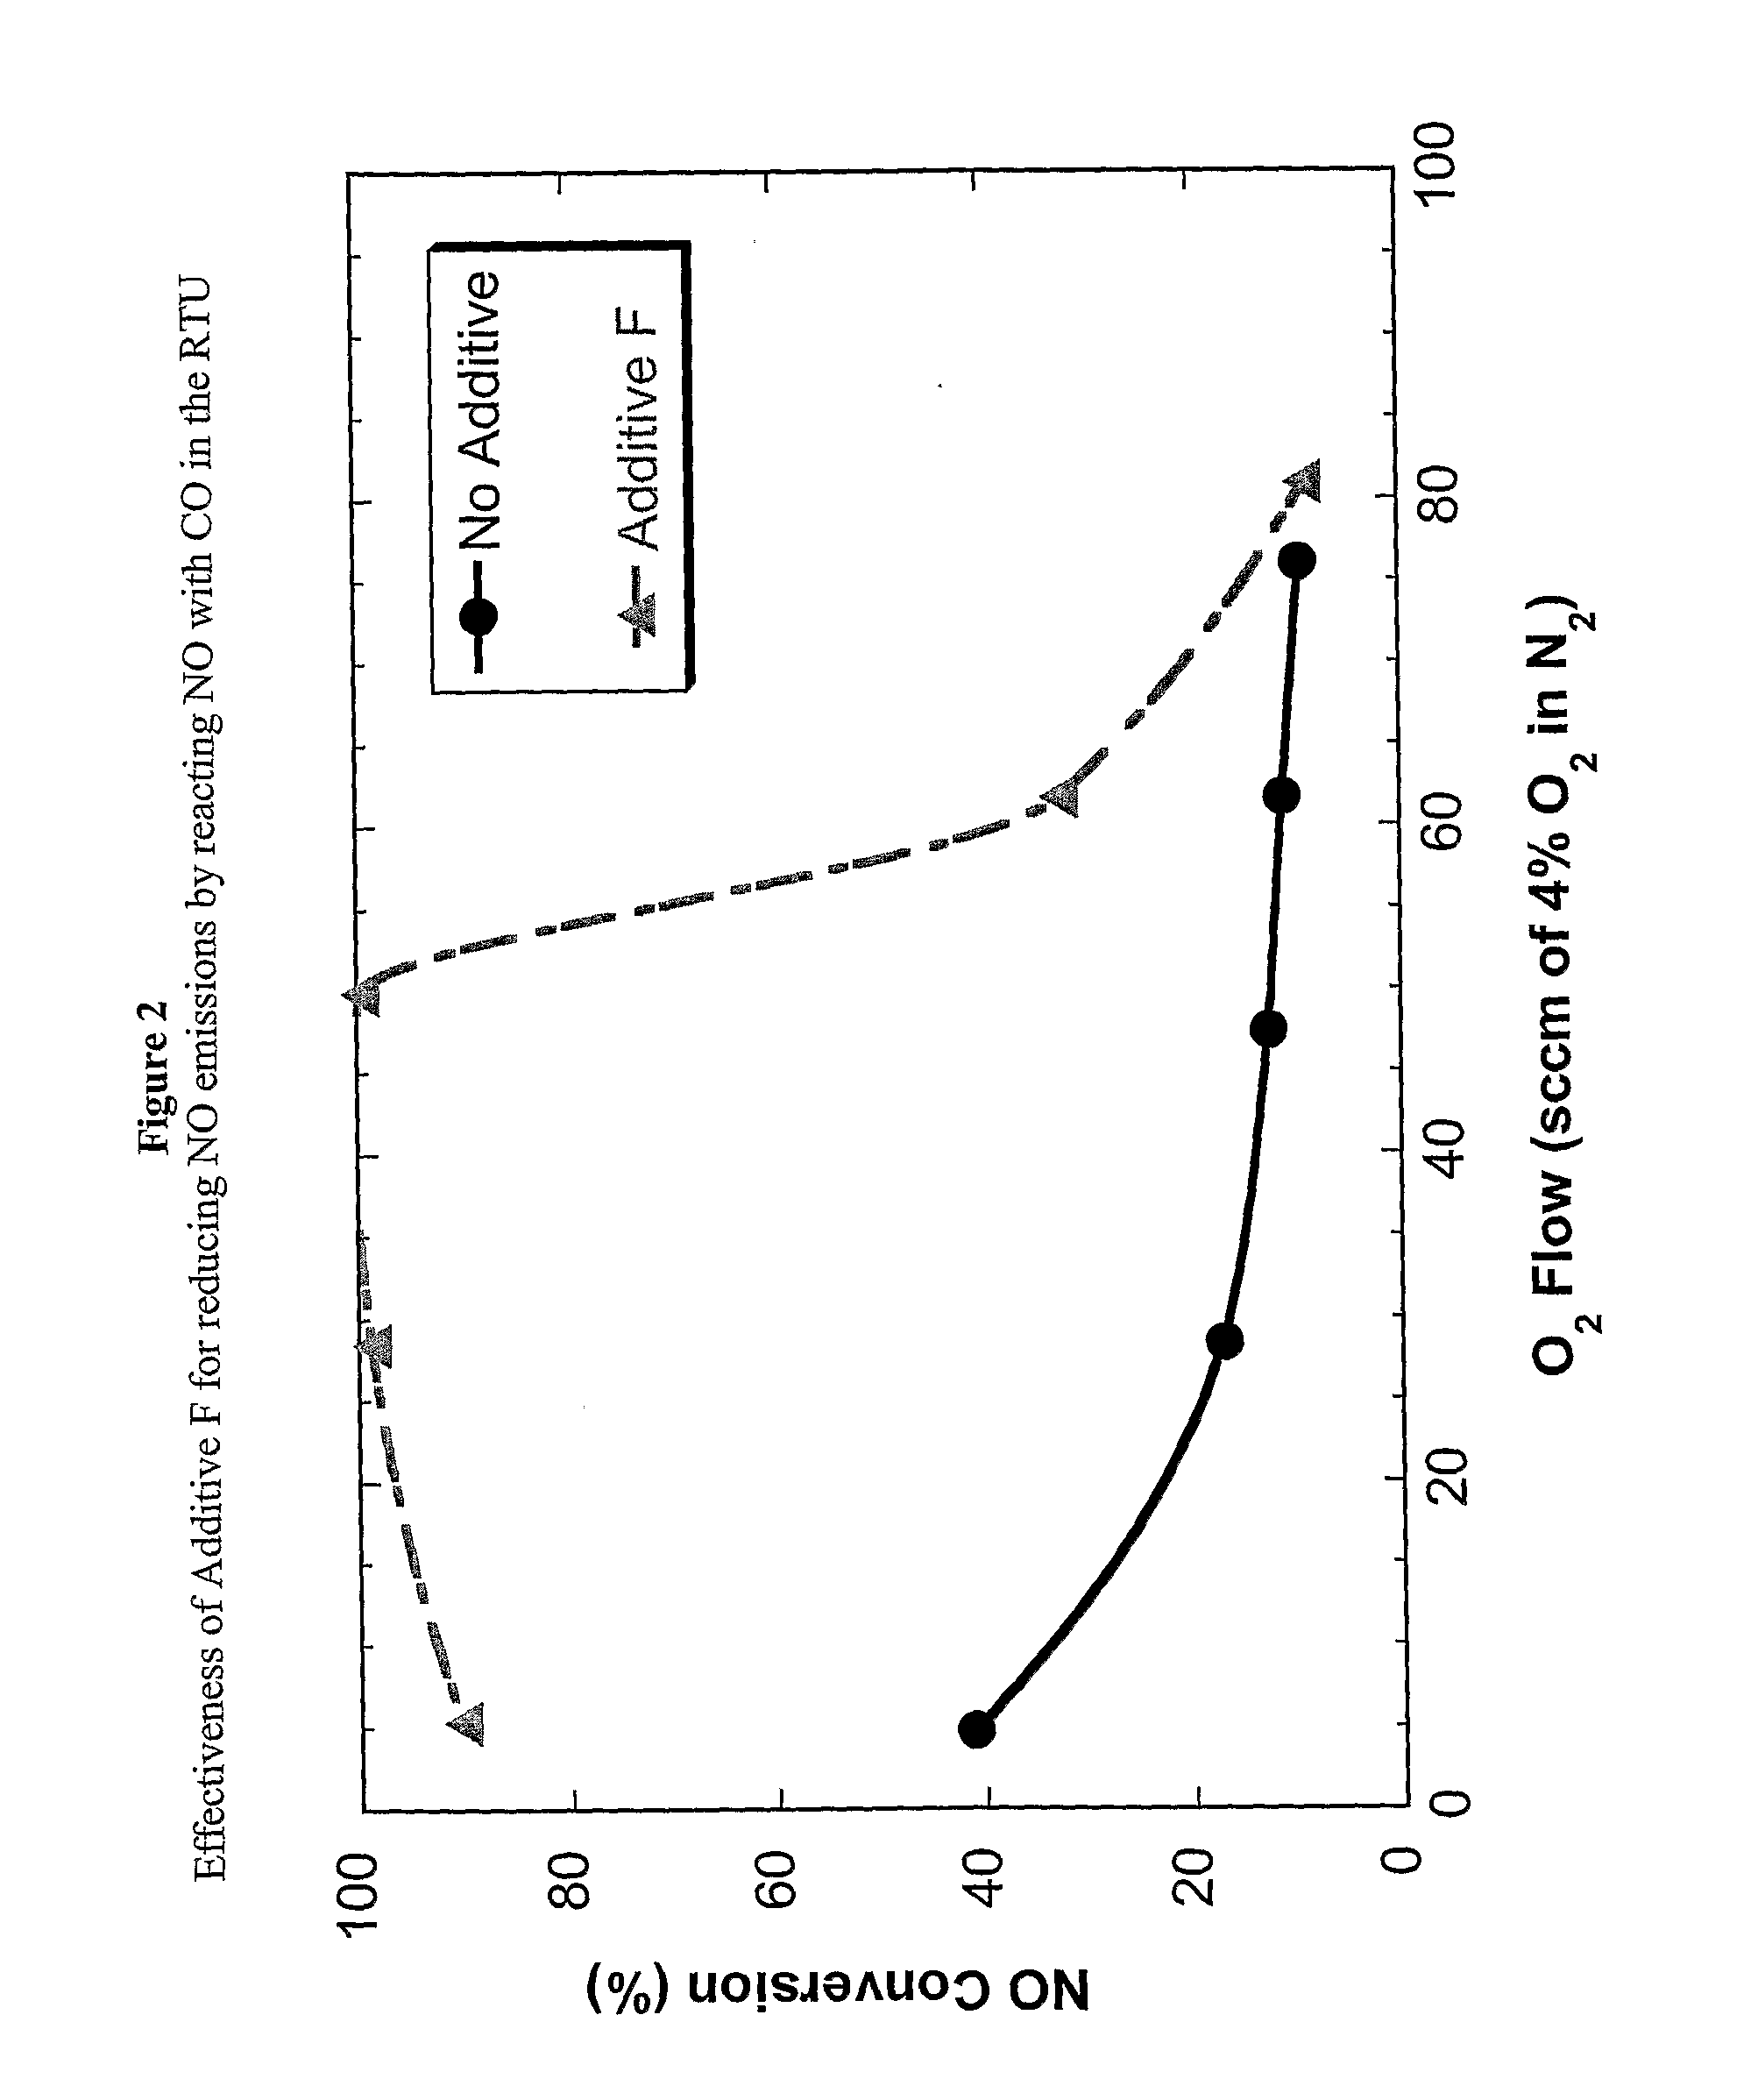 Method for Controlling Nox Emissions in the Fccu